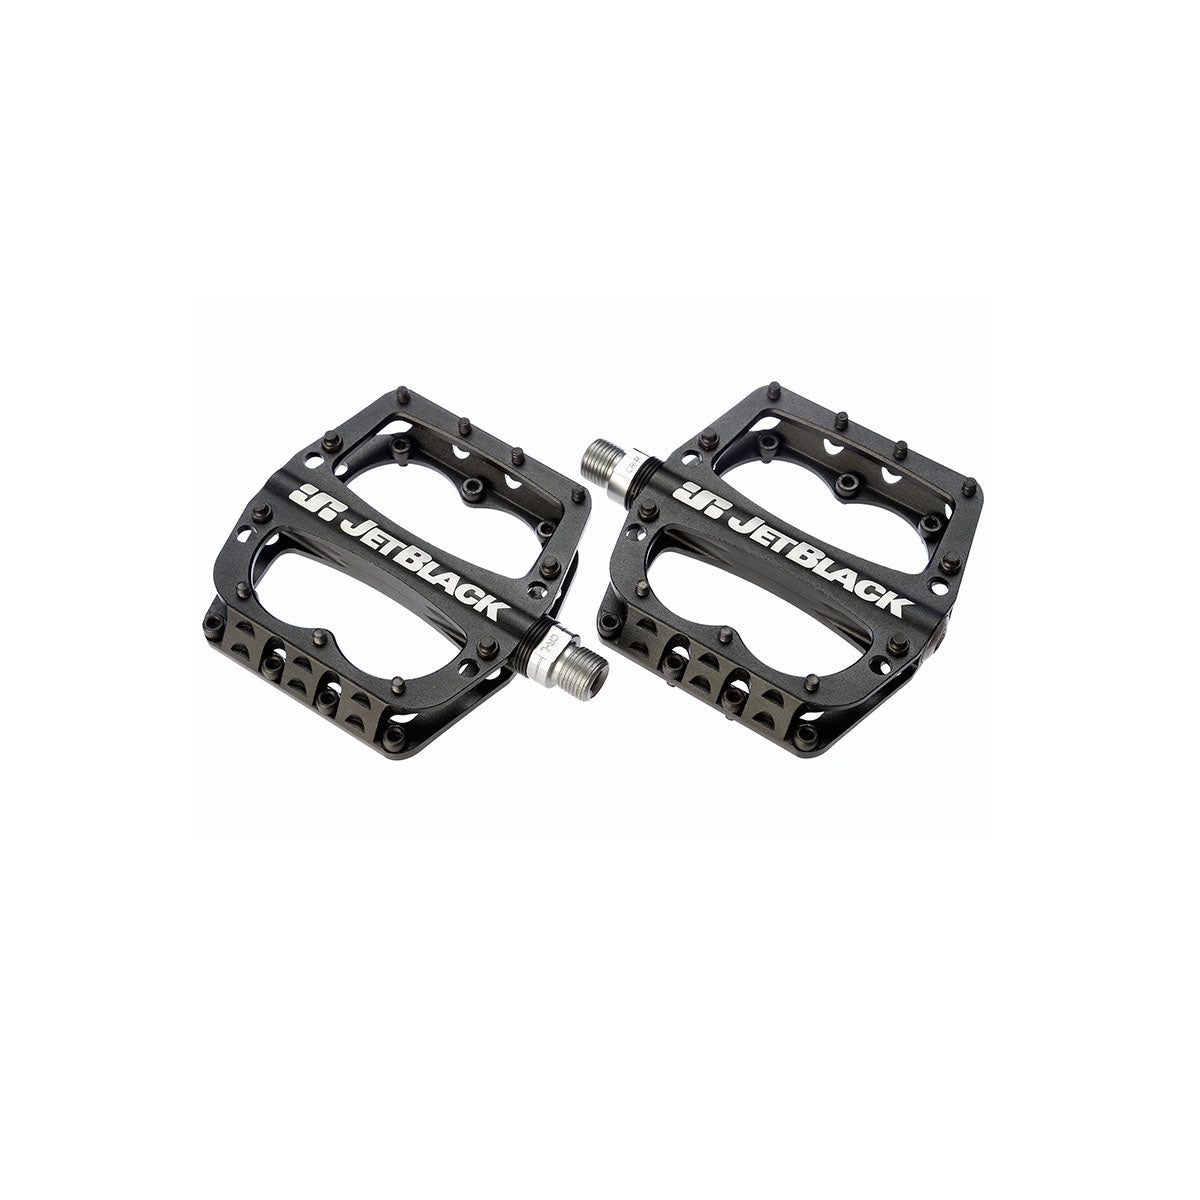 JetBlack Superlight MTB Pedals - Low Profile, Sealed Bearings